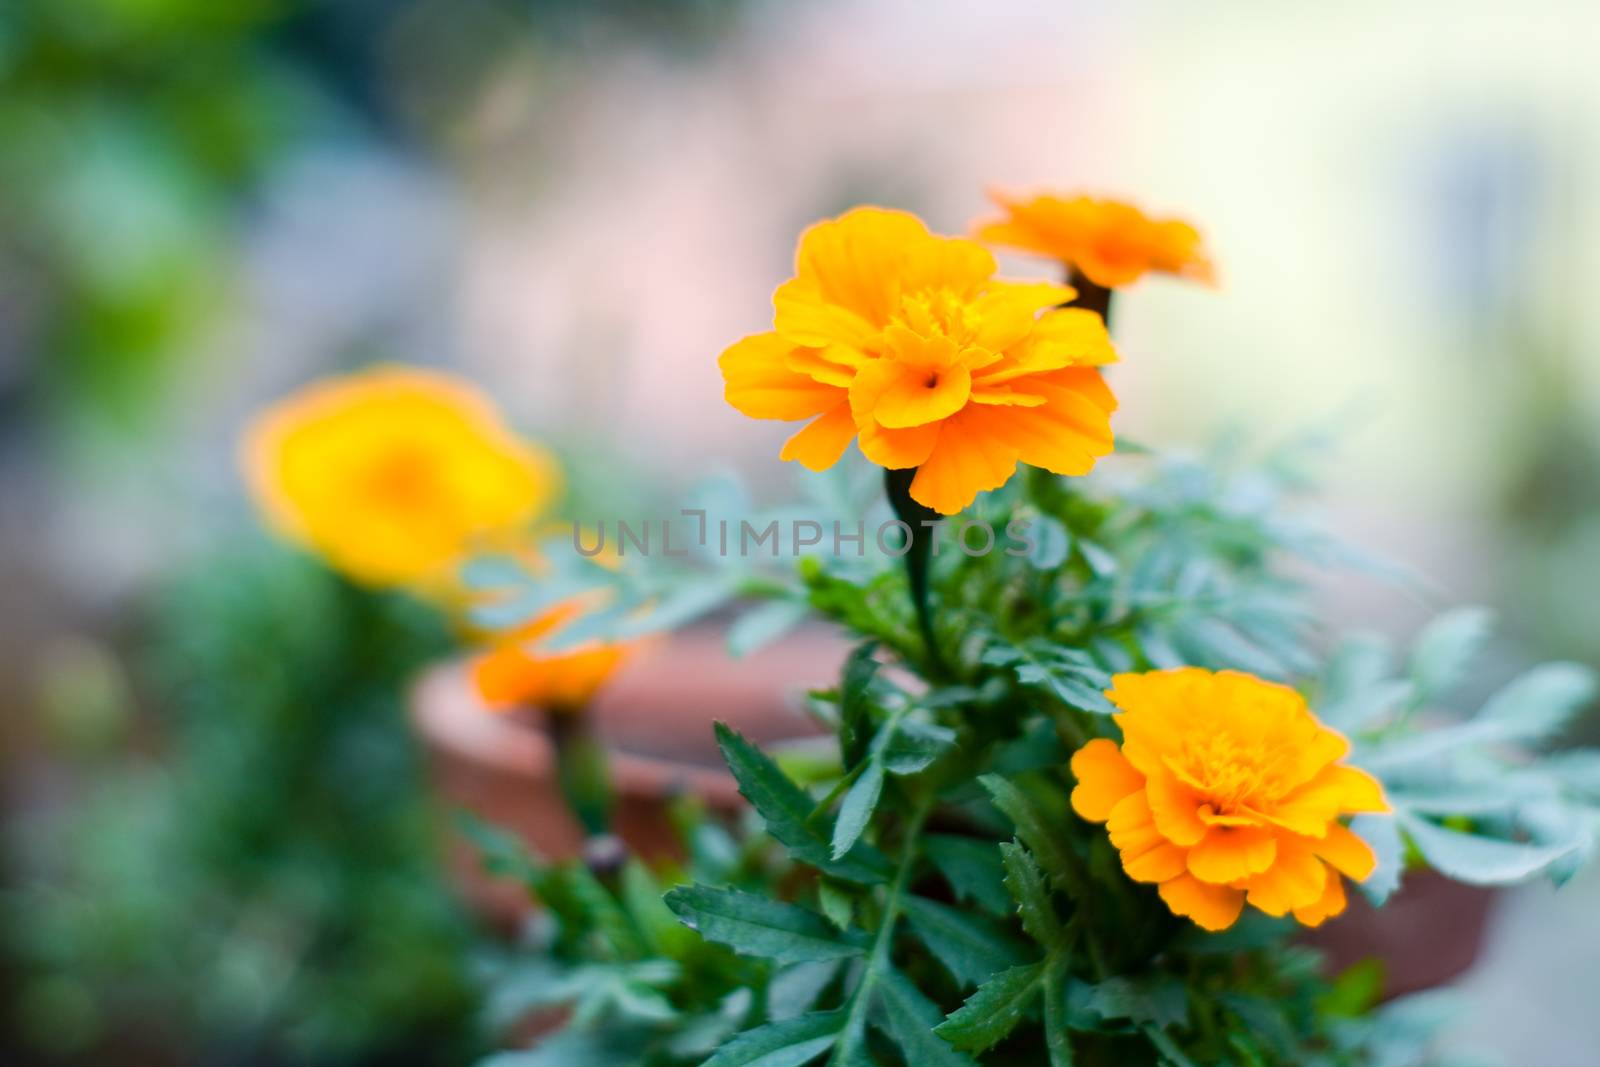 Close up of beautiful yellow marigold flower with green leaves in sunlight. Tagetes is a genus or perennial, a herbaceous plants of sunflower family. Blooms naturally in golden, orange, yellow. by sudiptabhowmick